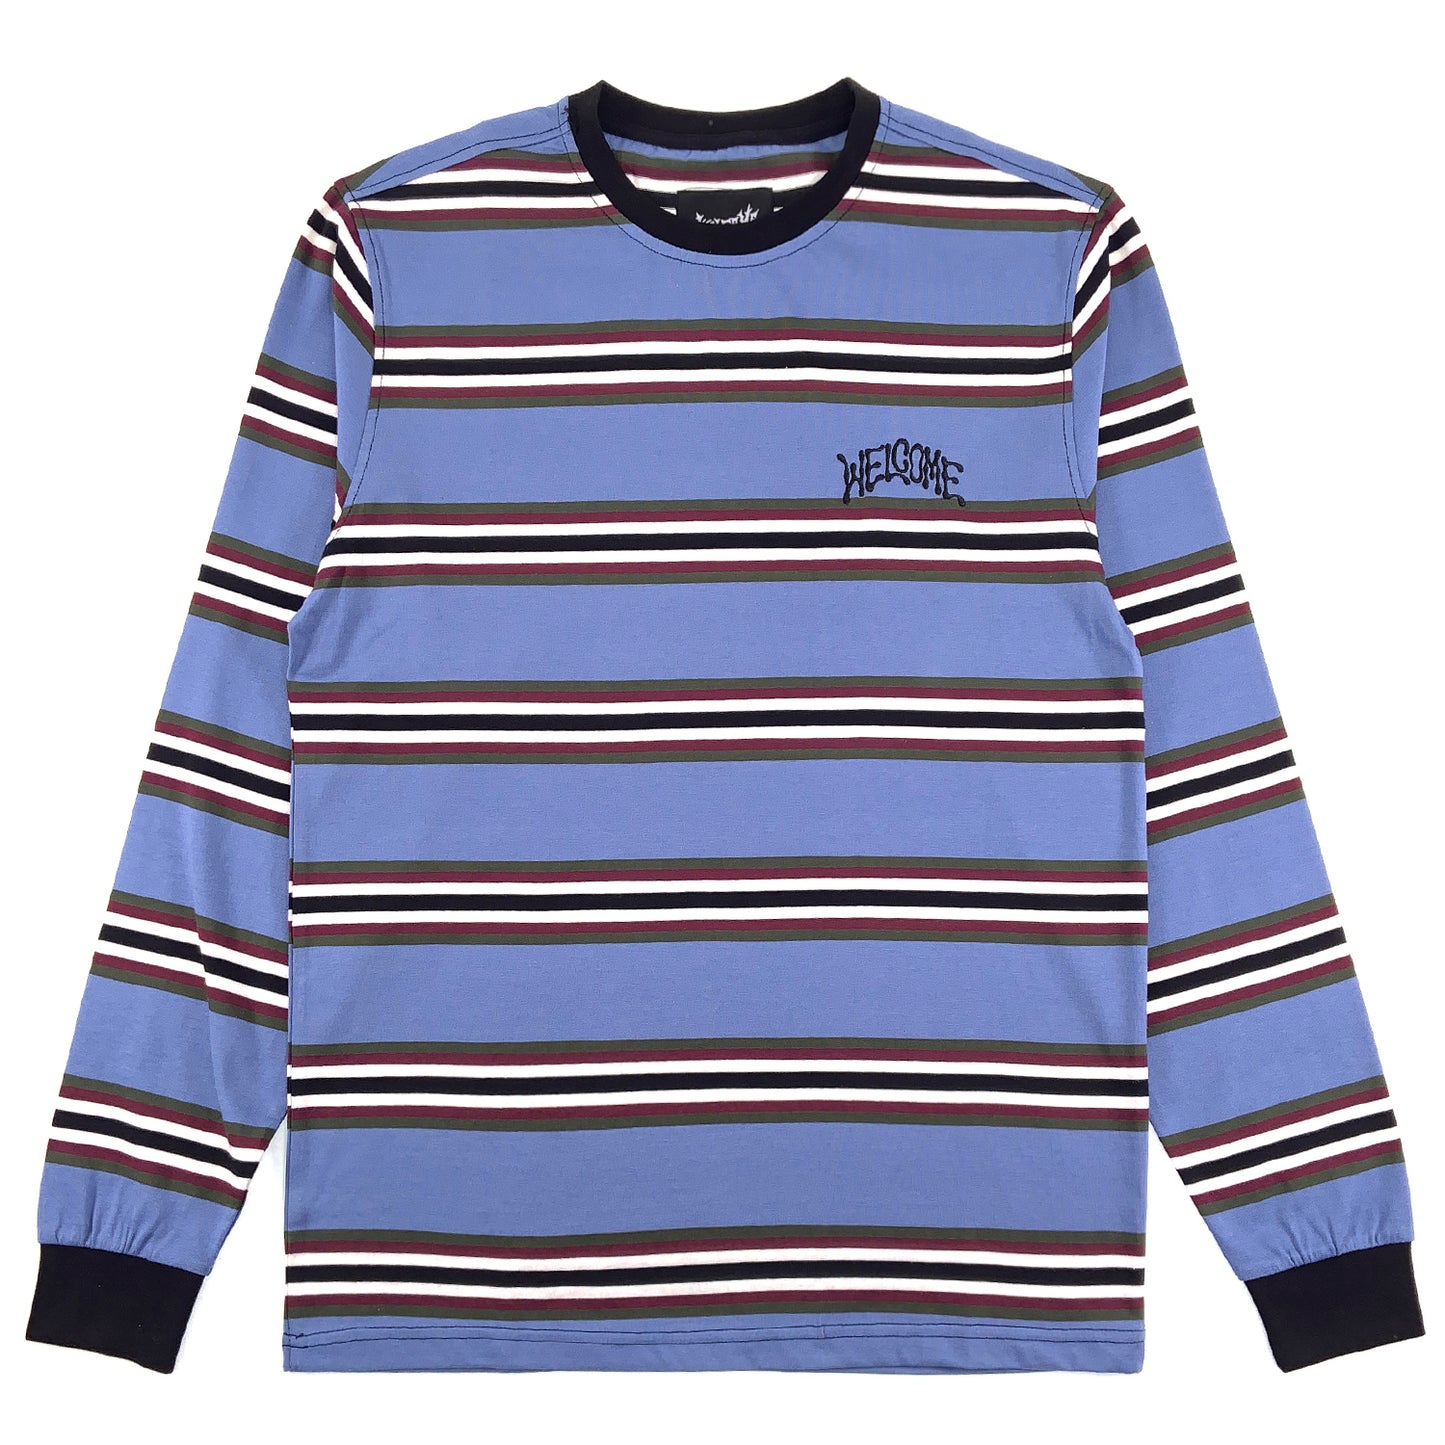 Welcome - Thelema Stripe Yarn-Dyed L/S Knit - Nightshade - Prime Delux Store